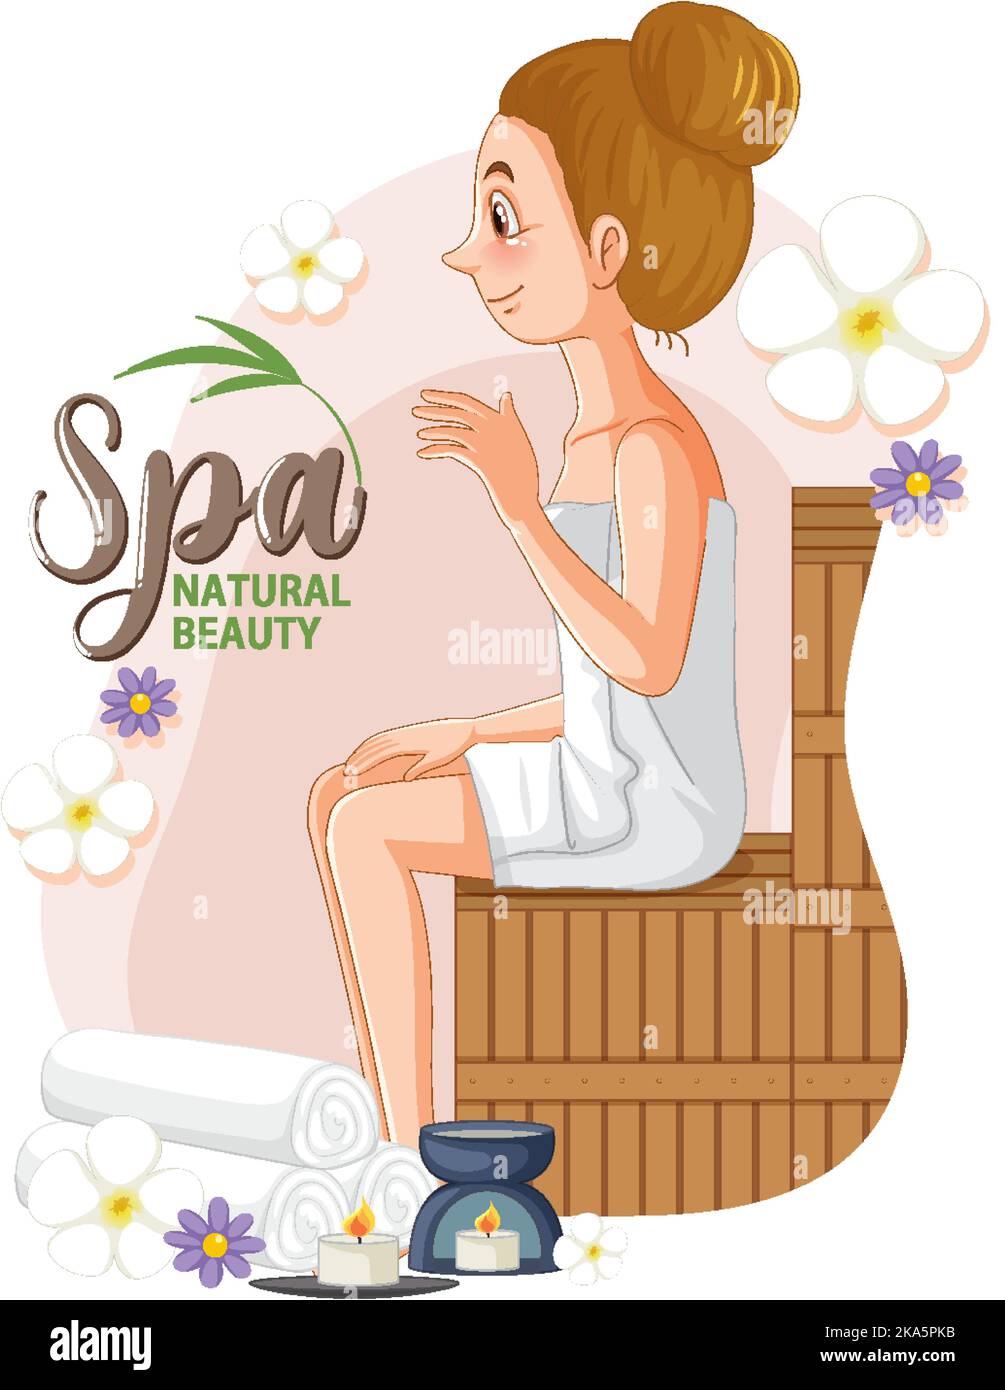 Spa natural beauty text with spa woman illustration Stock Vector